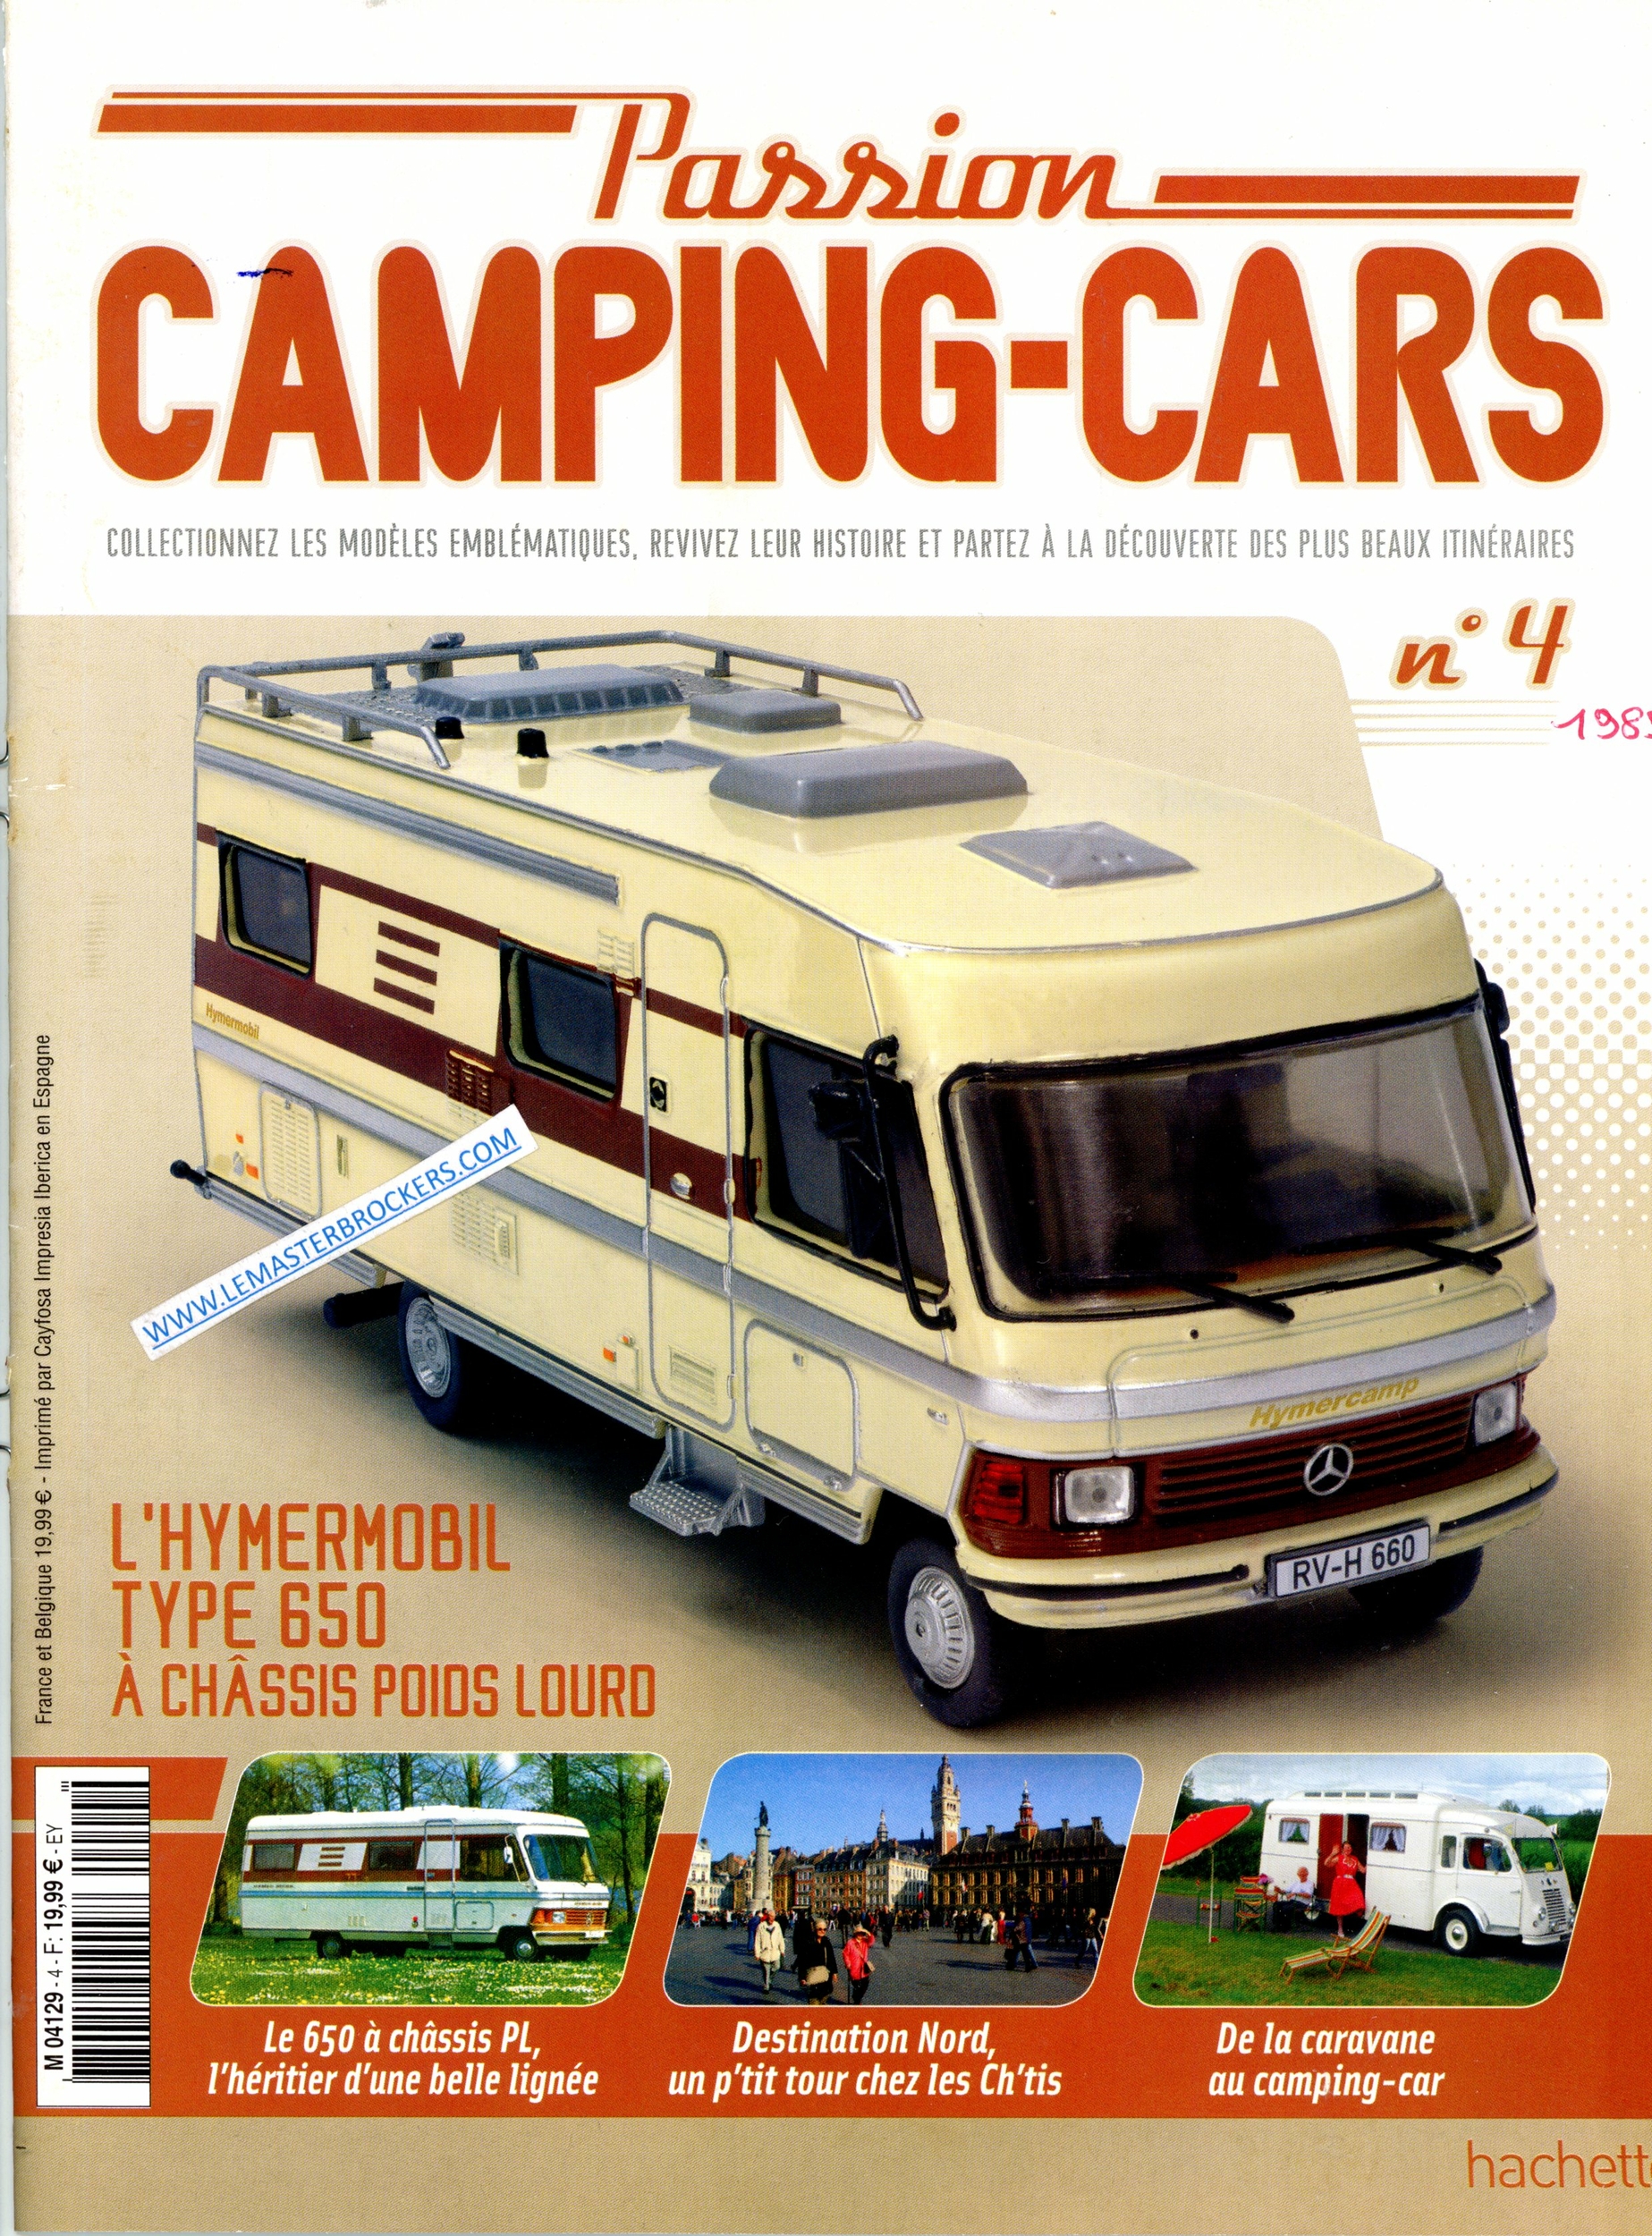 HYMERMOBIL 650 1985 PASSION CAMPING-CARS